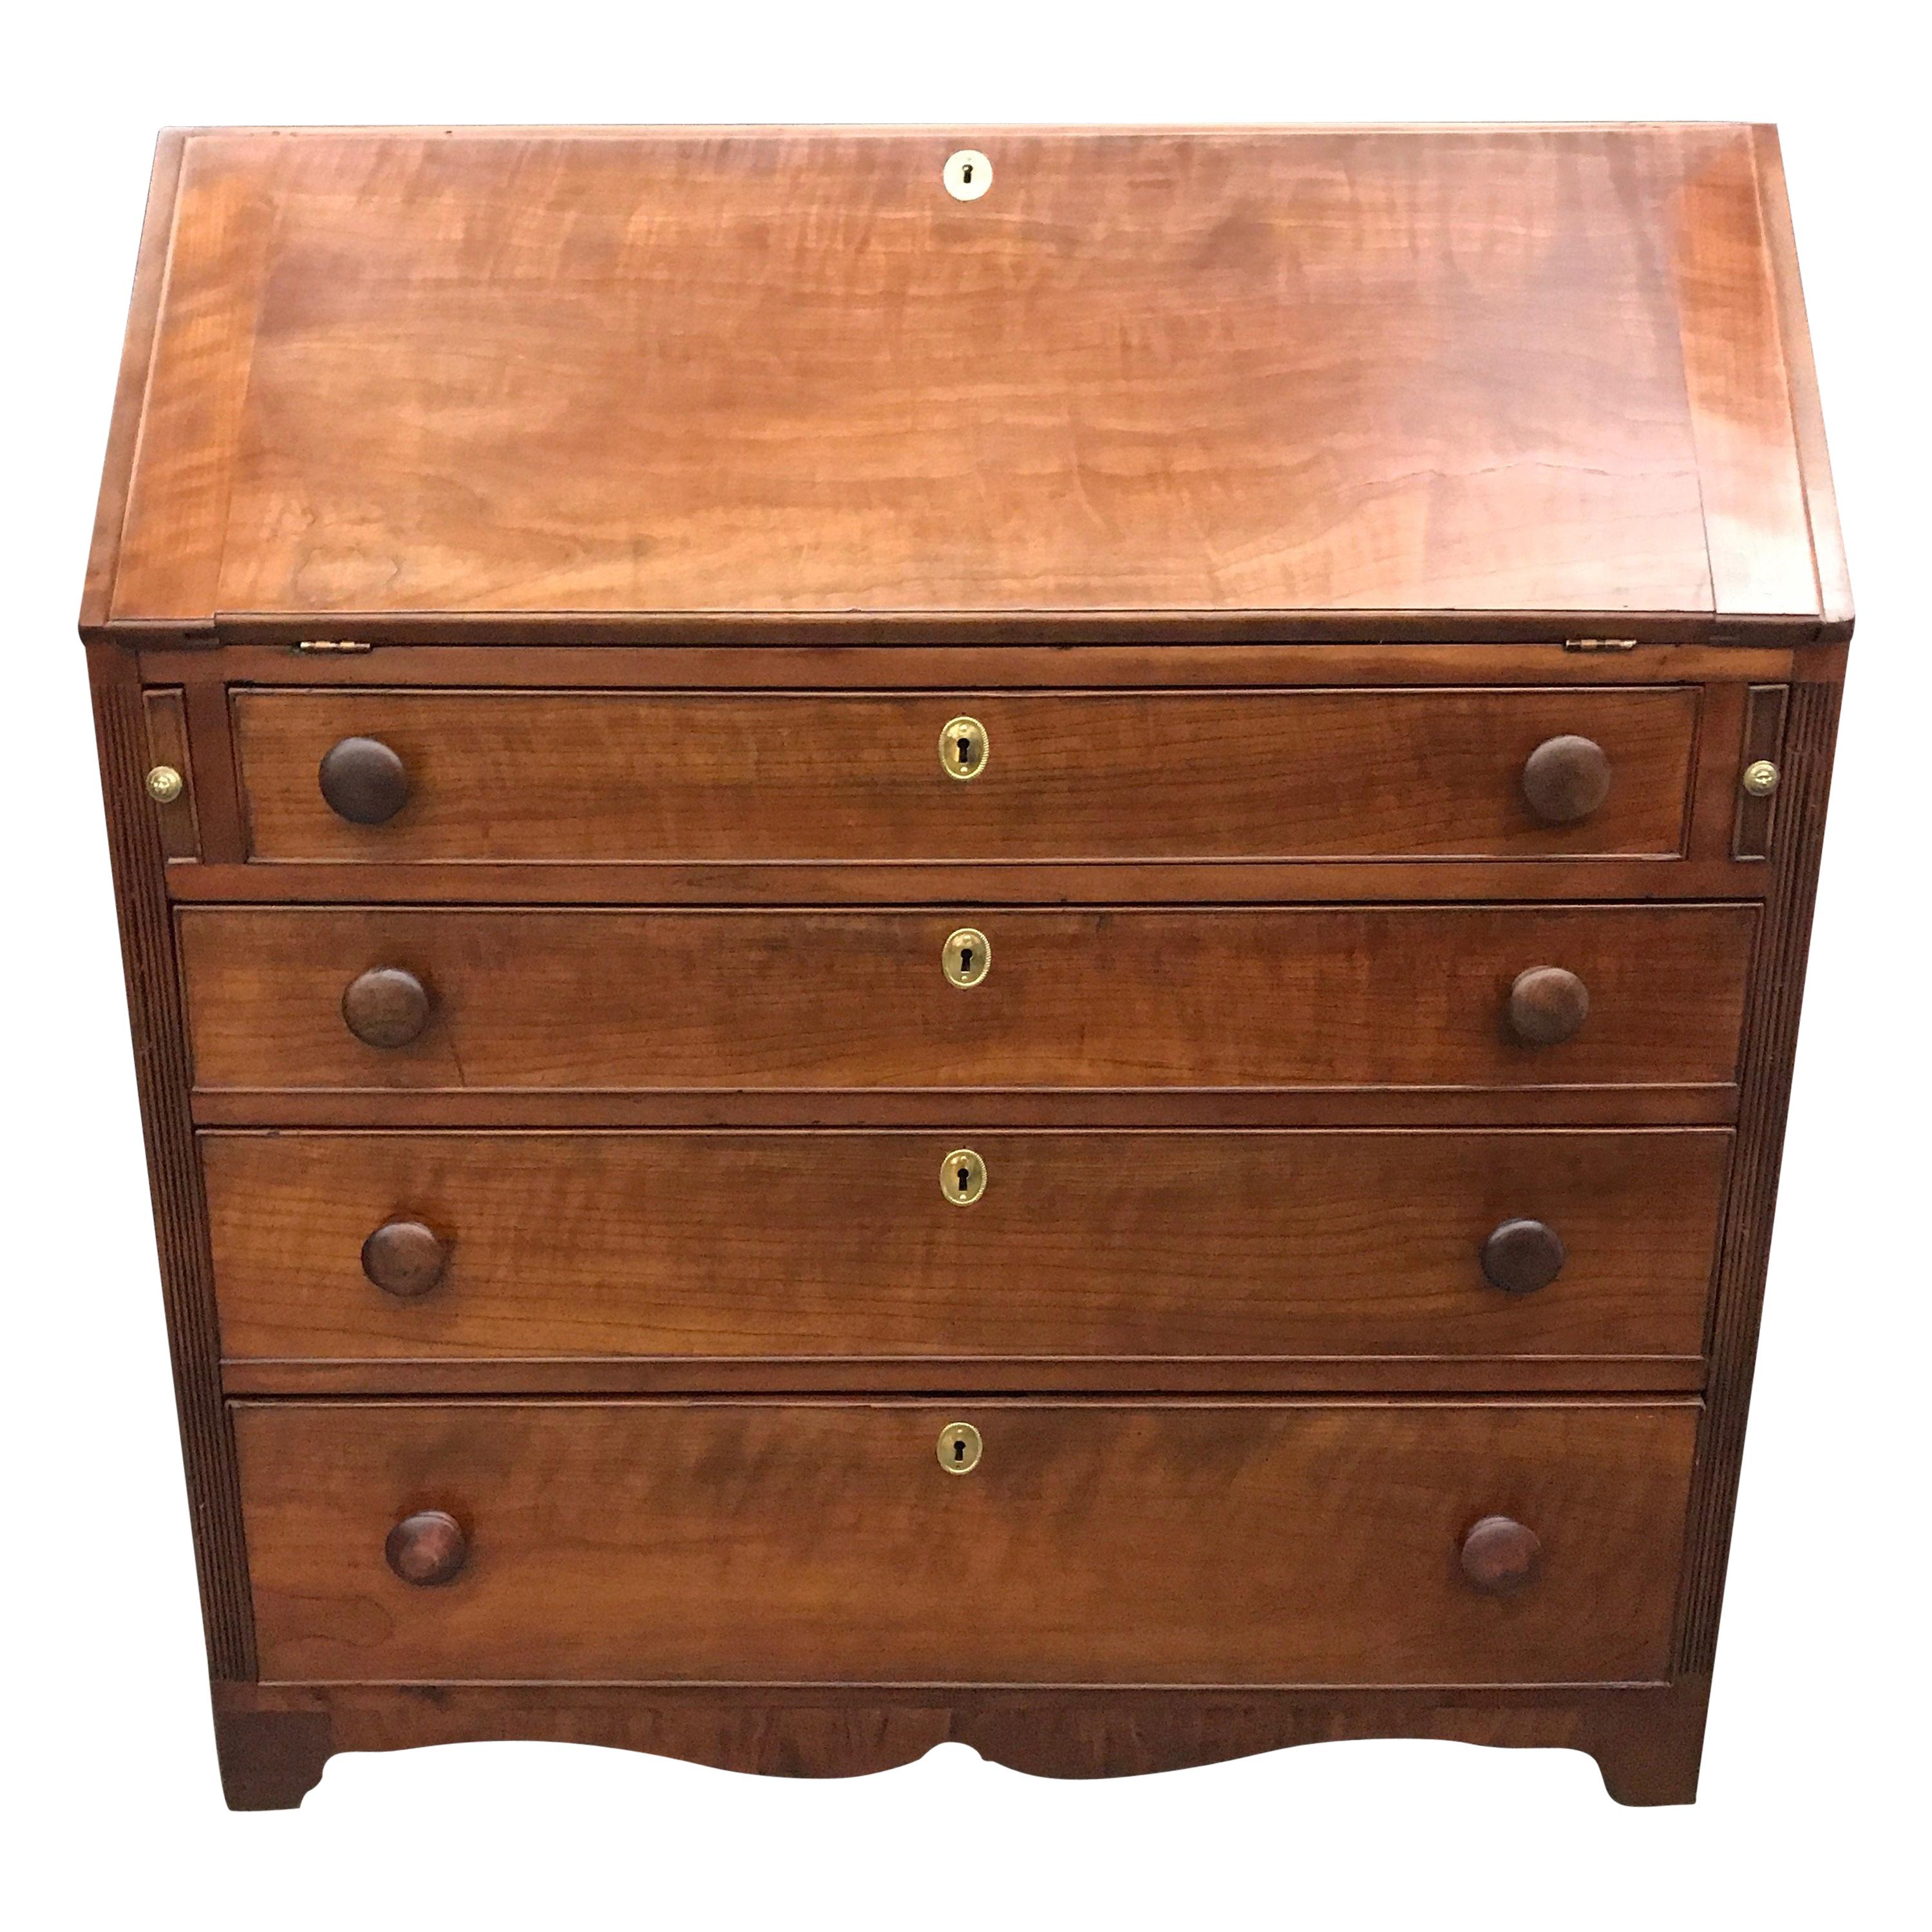 Slant Front Desk in Figured Cherry with Wood Knobs and Brass Escutcheons For Sale